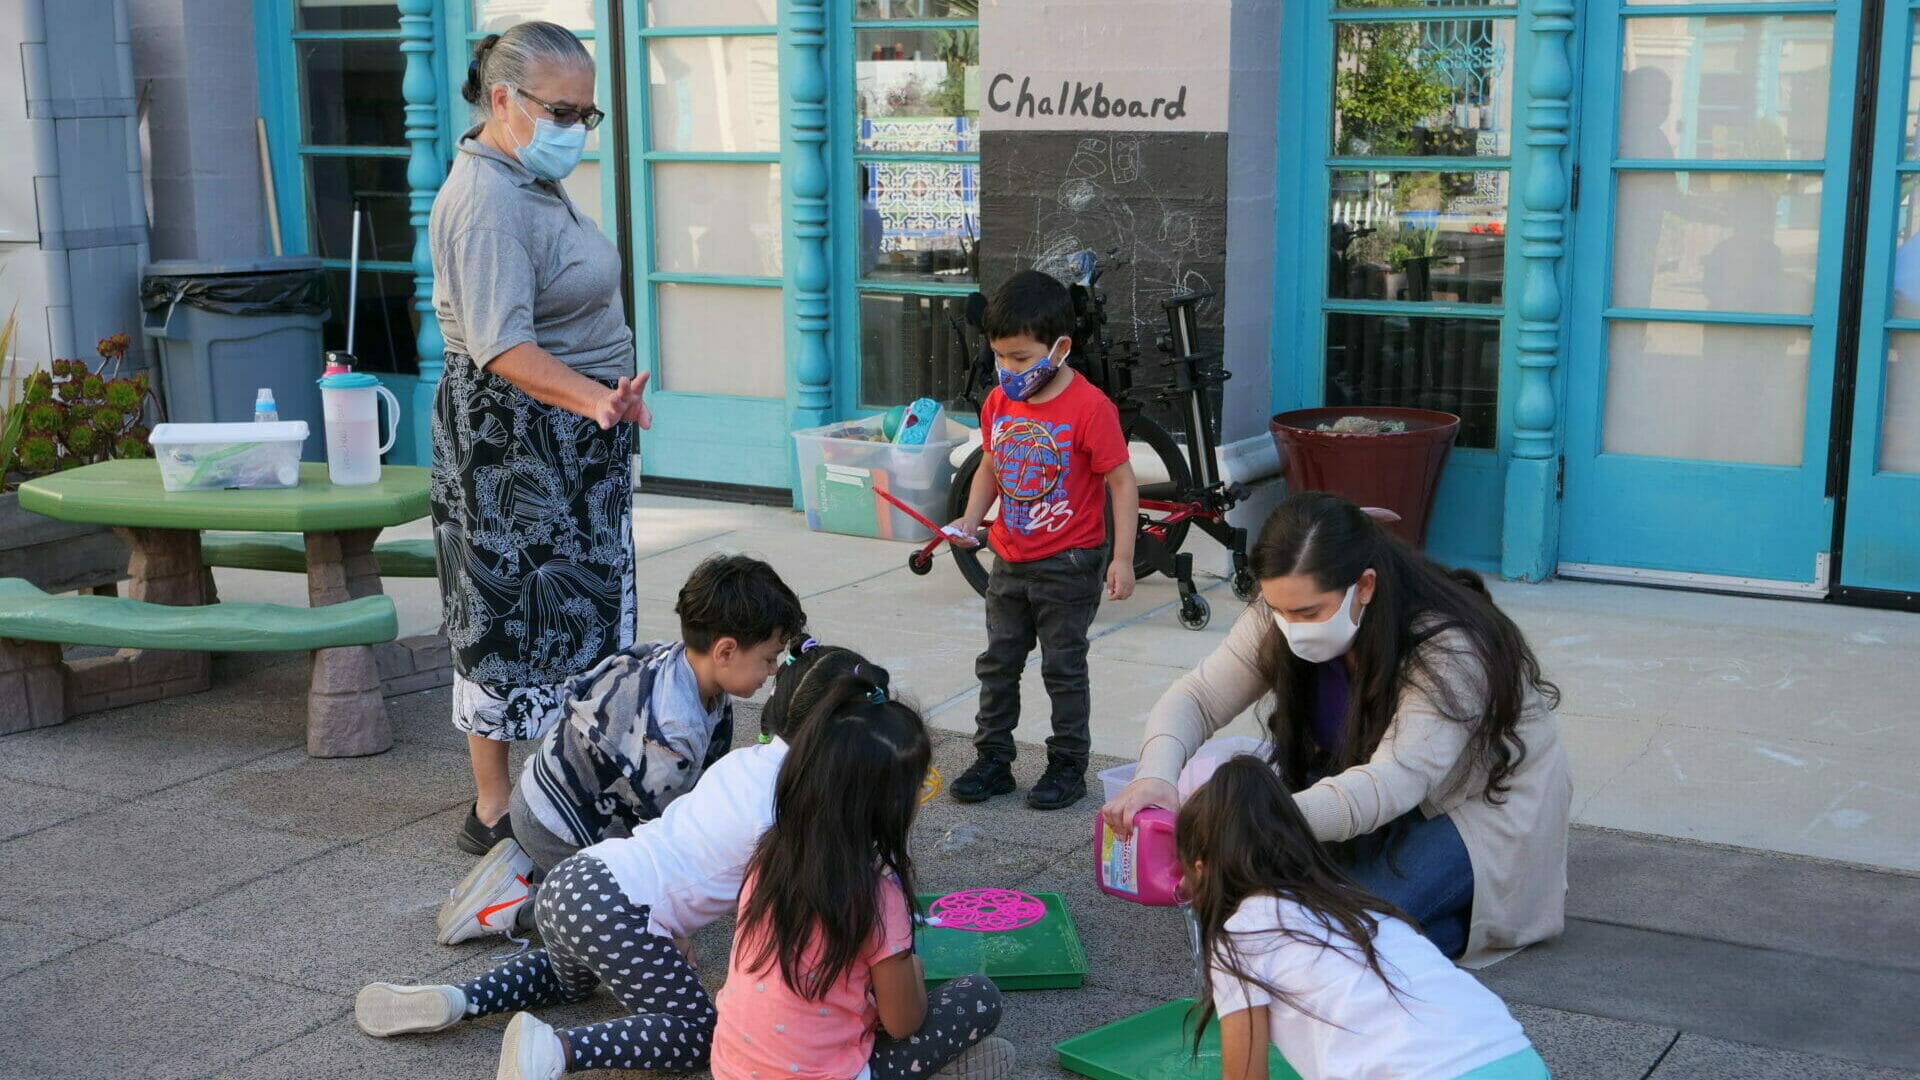 A group of young children gather around a crouching early educator who is making bubbles while another teacher in a surgical mask stands next to them.